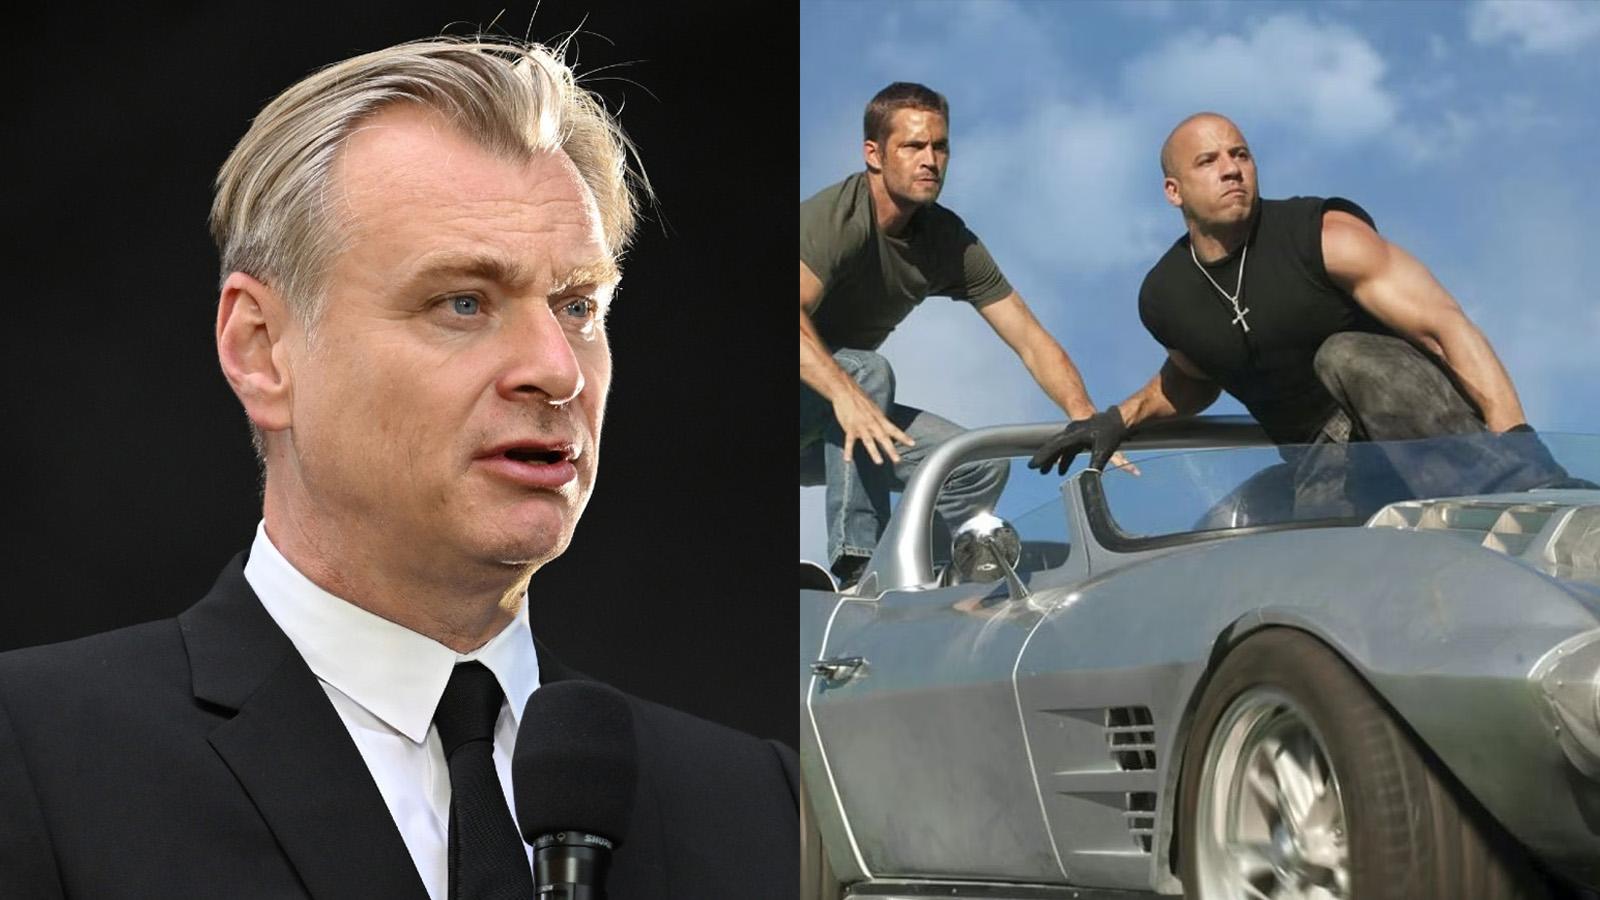 An image of Christopher Nolan besides a still from the Fast and the Furious franchise